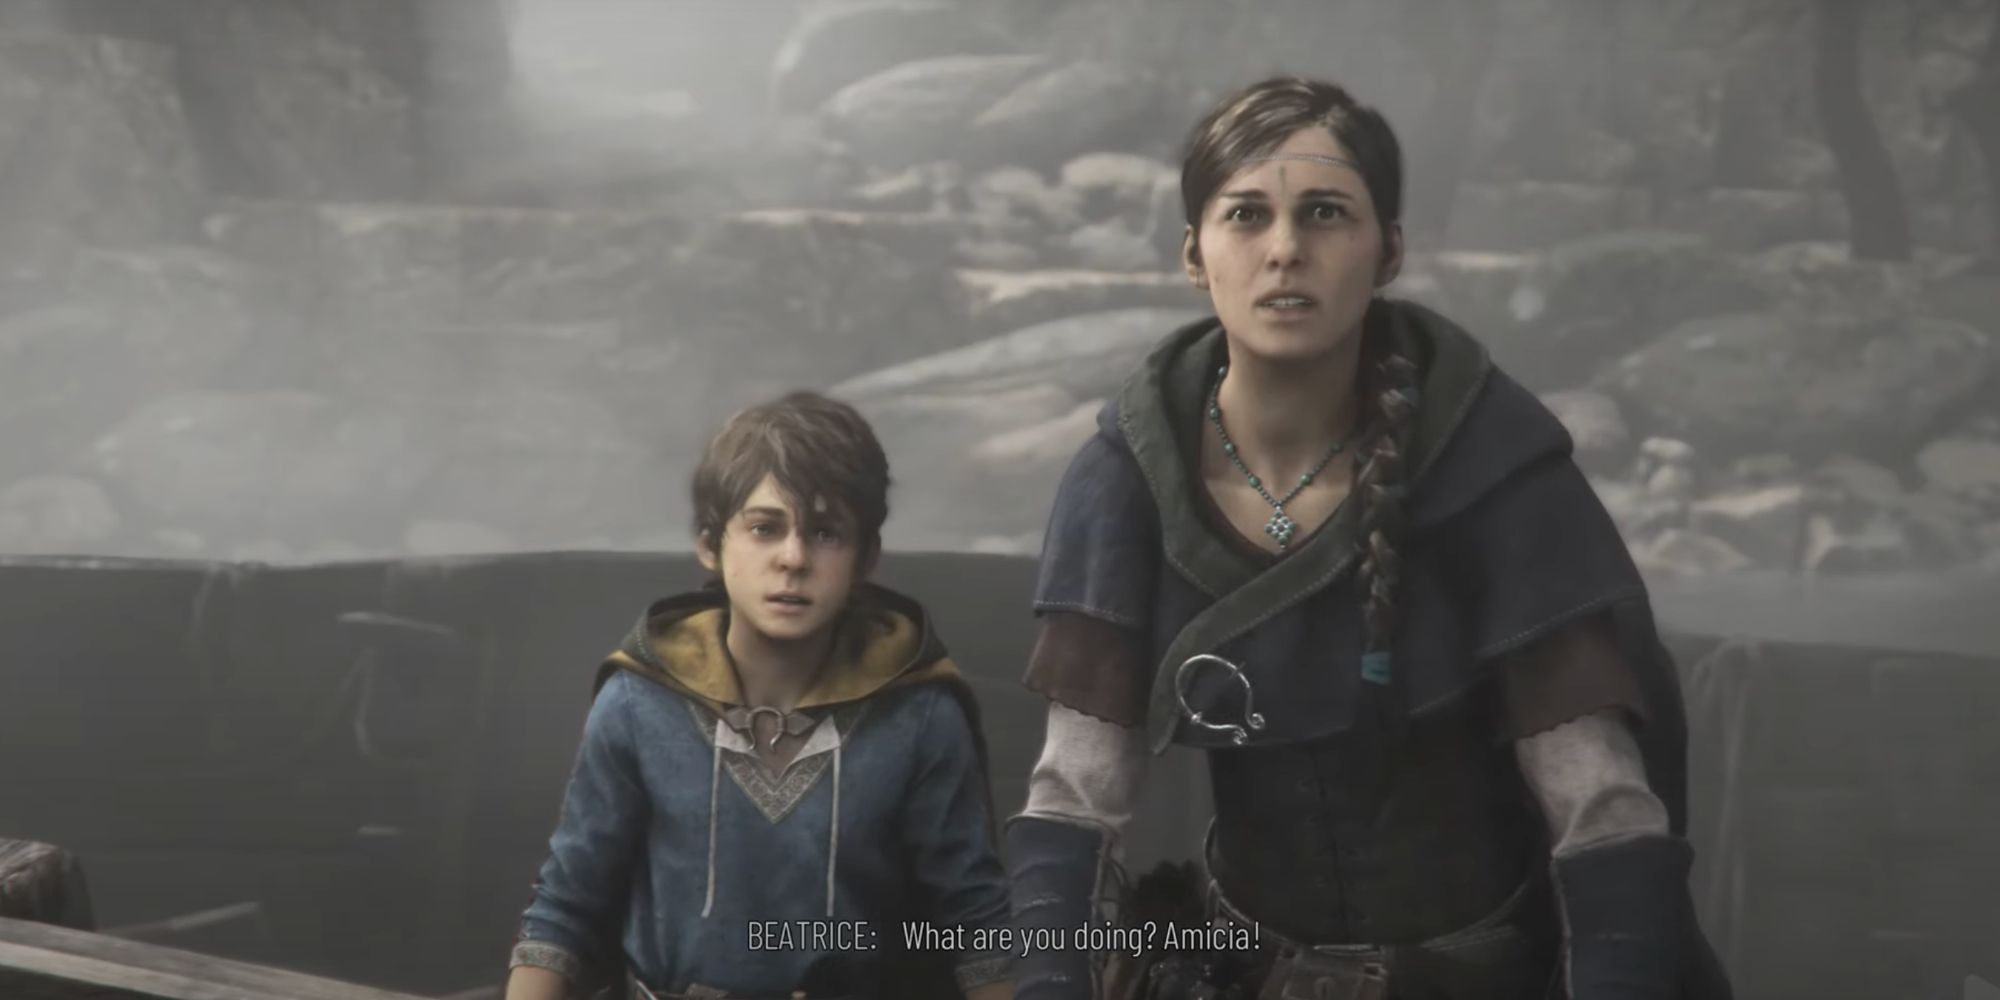 Unanswered Questions After The End Of A Plague Tale: Requiem